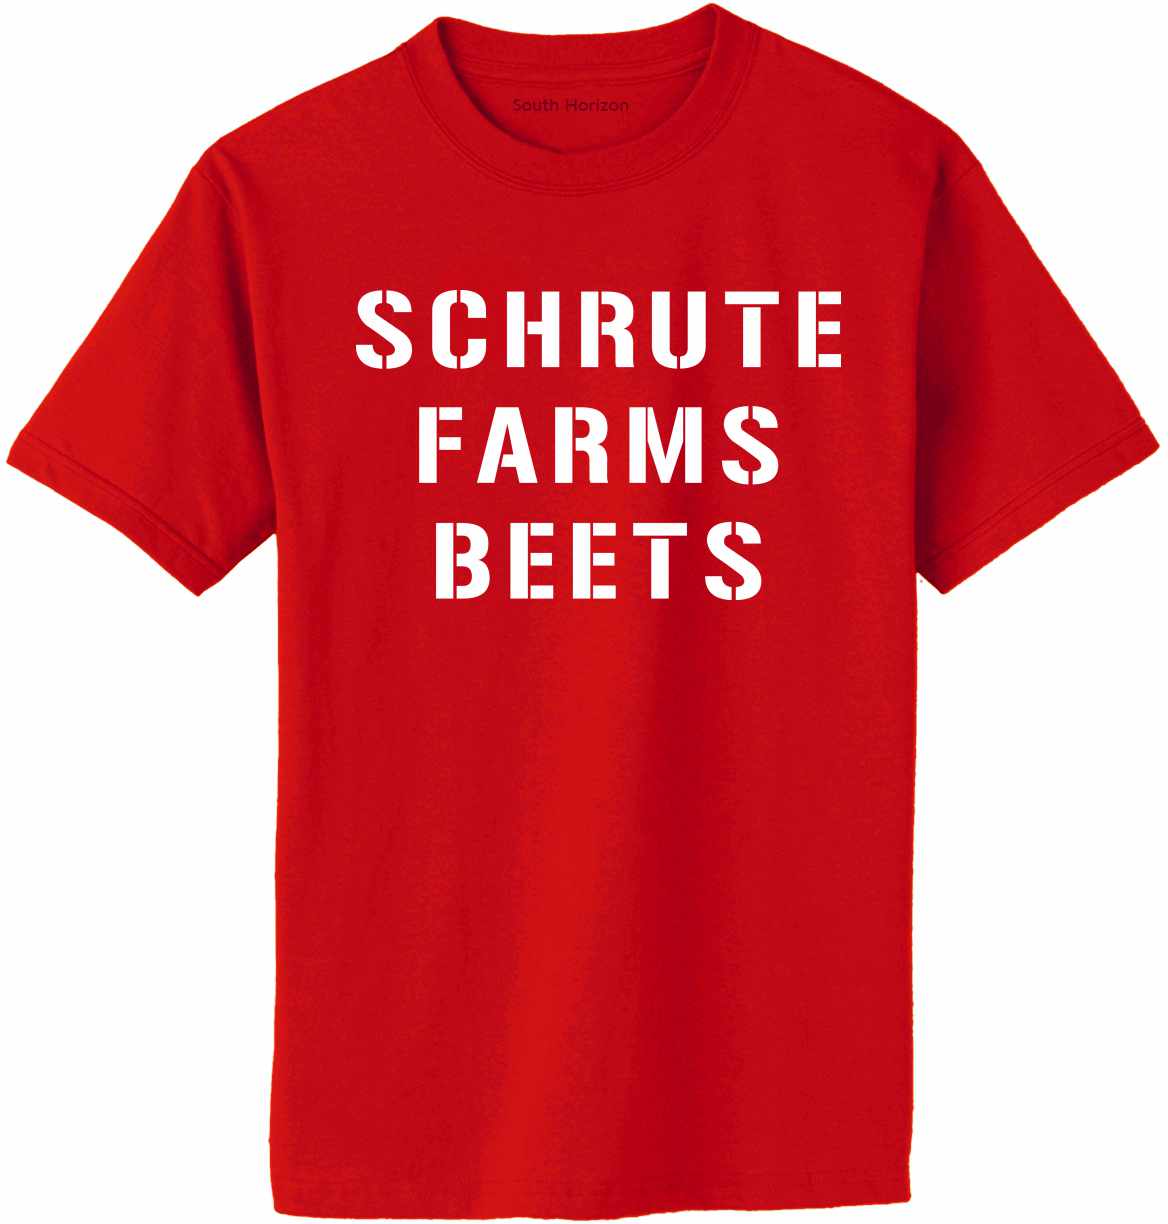 SCHRUTE FARMS BEETS Adult T-Shirt (#396-1)